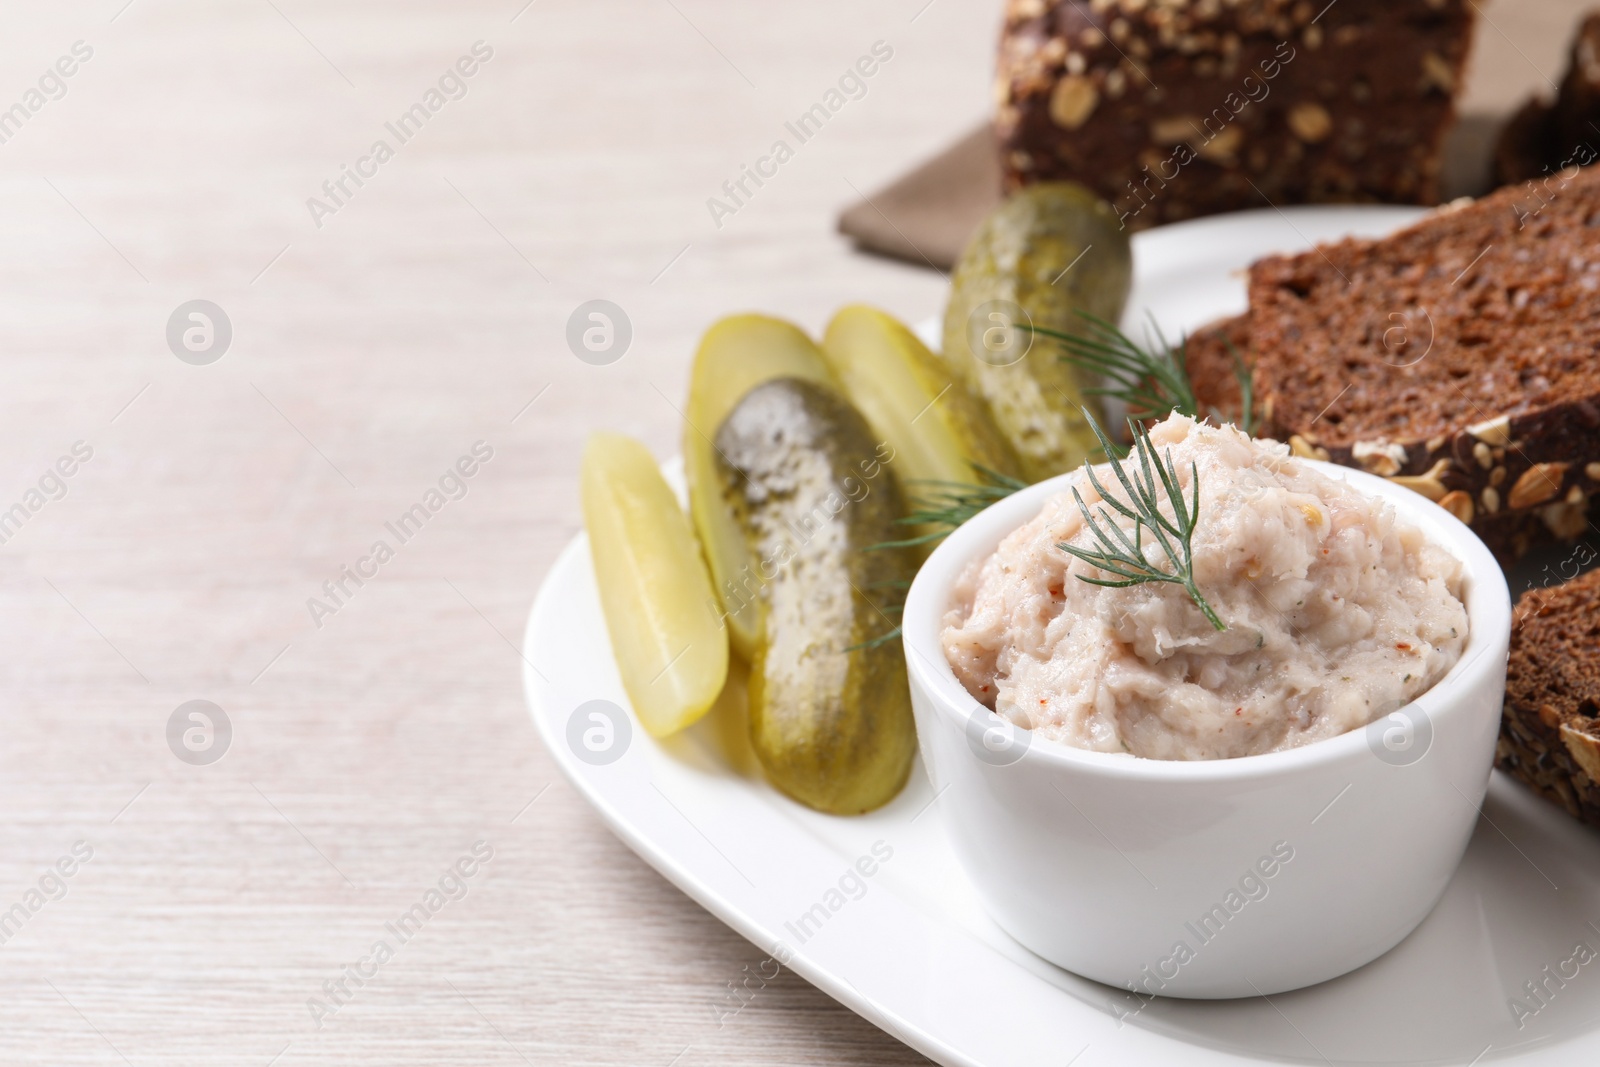 Photo of Delicious lard spread, bread and pickles on wooden table. Space for text